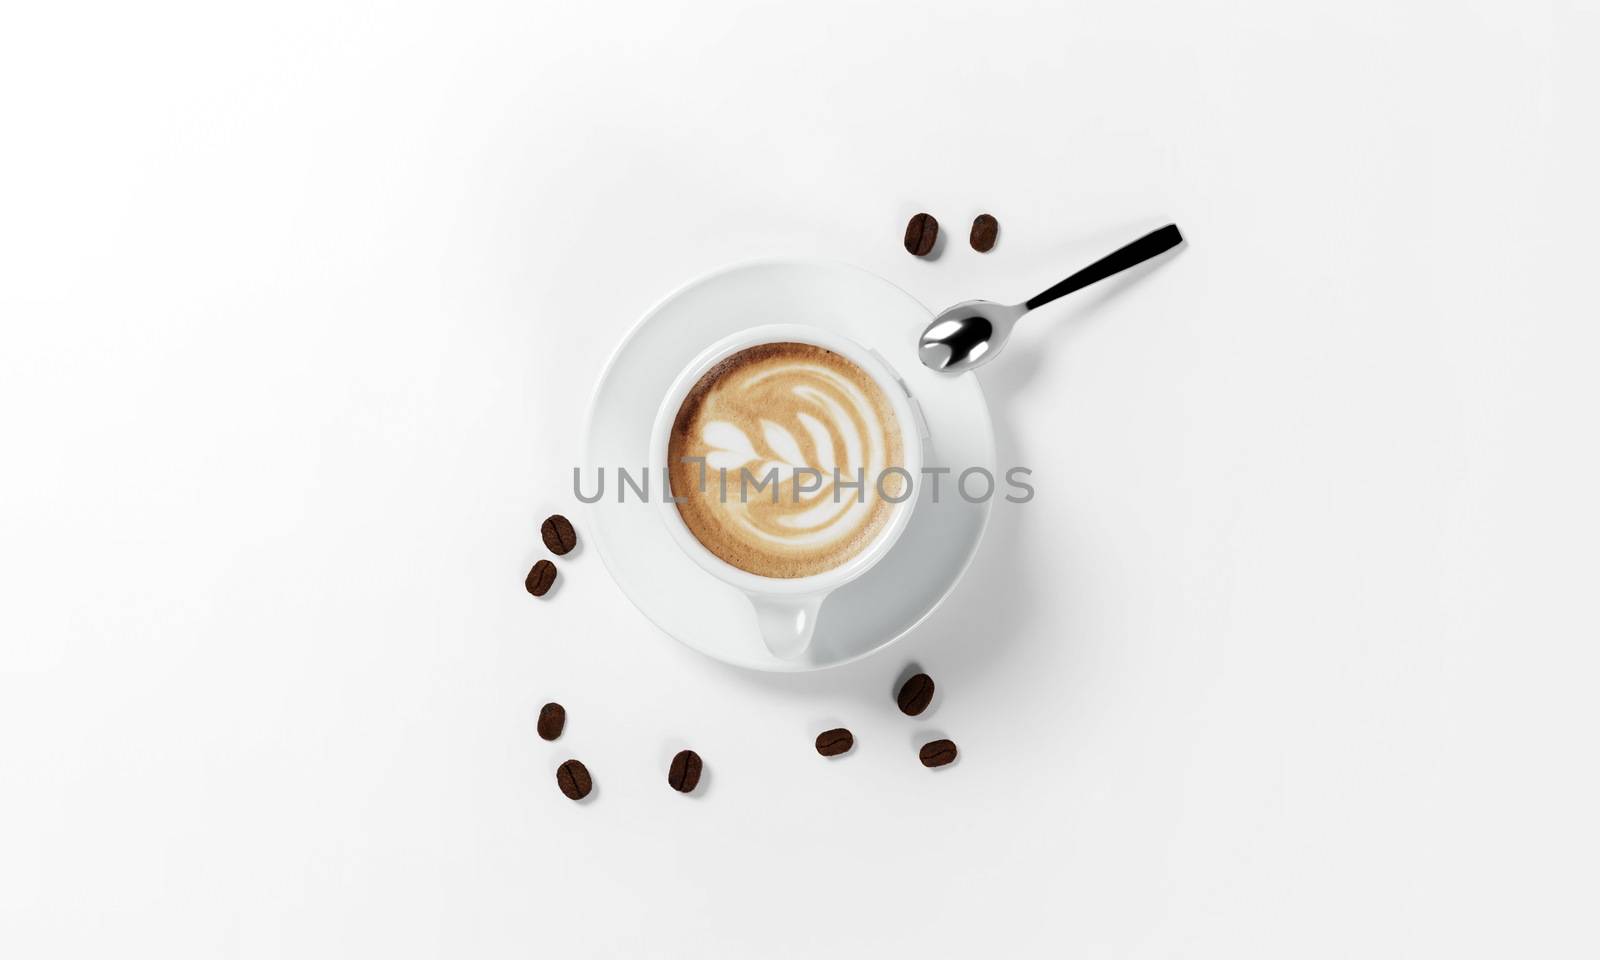 cup of coffee with coffee beans, milk froth, saucer and spoon isolated on a white background, 3d render